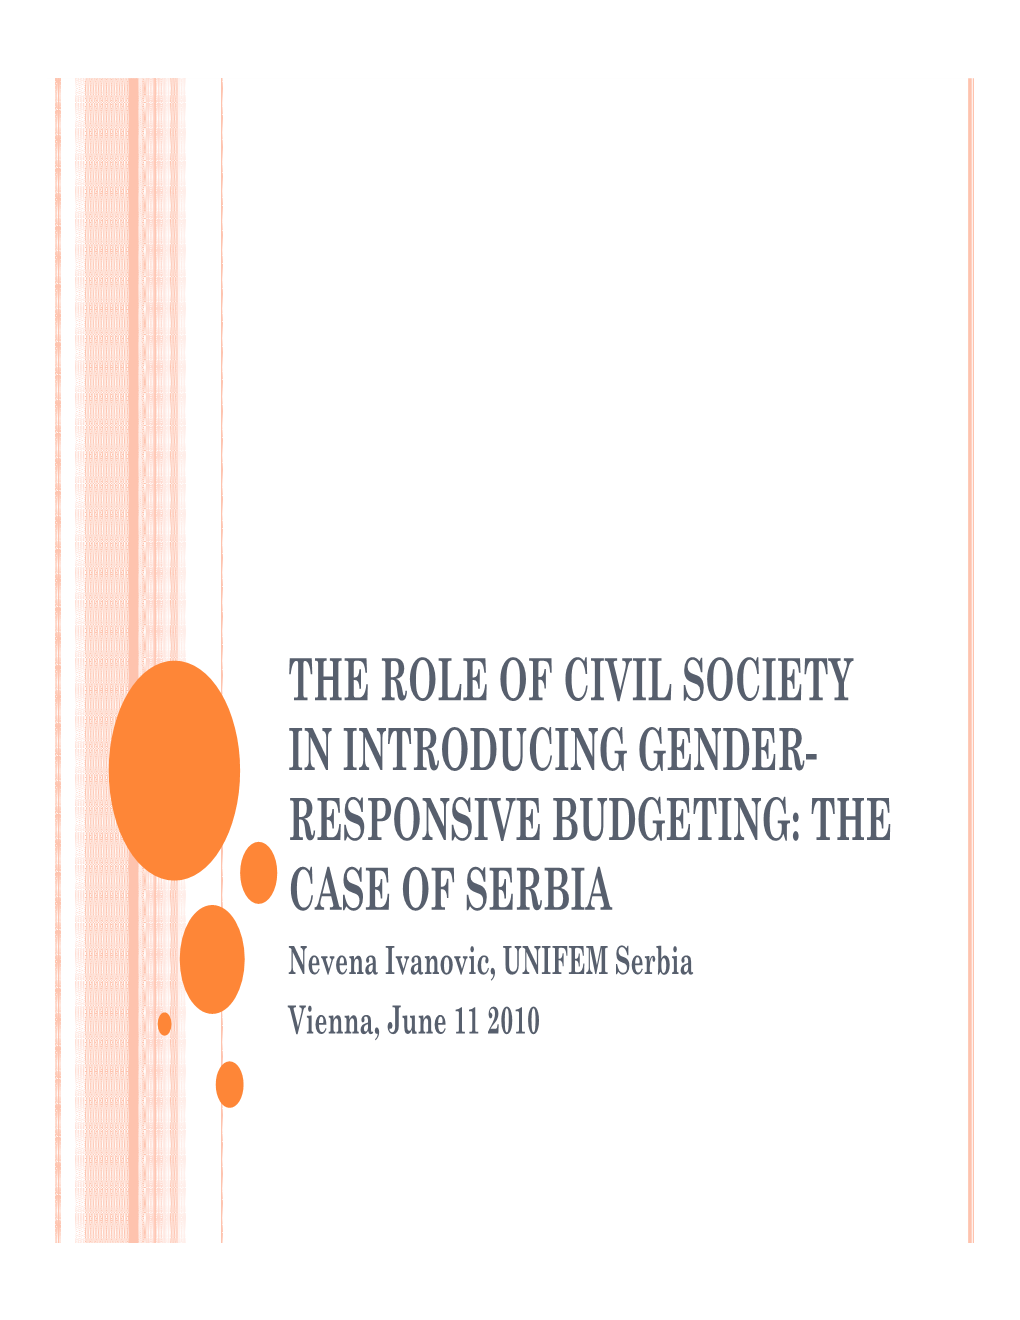 The Role of Civil Society in GRB: the Case of Serbia